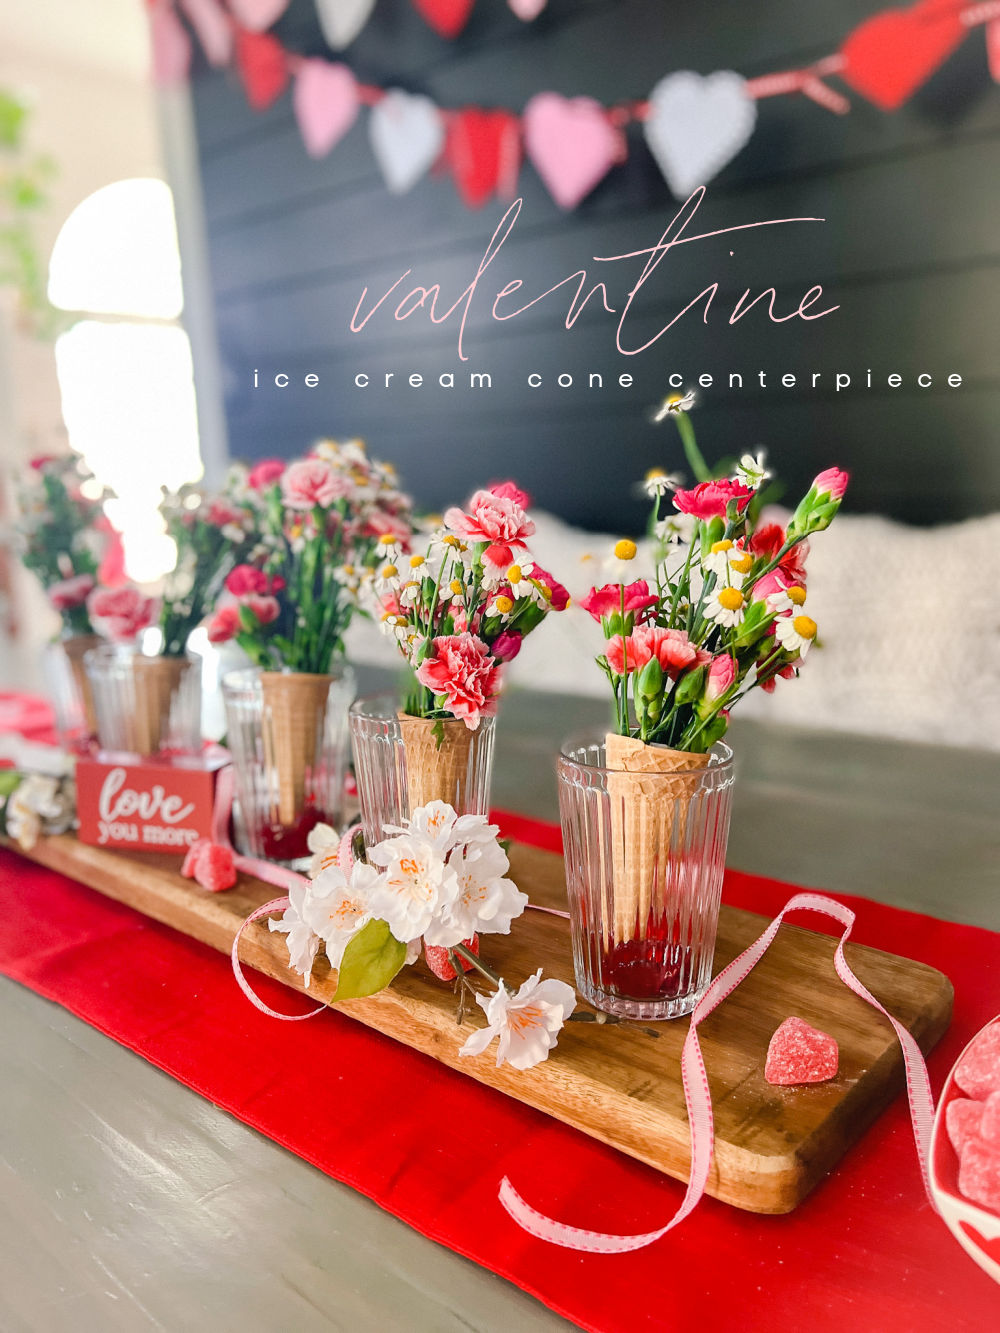 Galantine's Ice Cream Cone Centerpiece! Use grocery store flowers and ice cream cones to create the perfect Valentine or Galentine centerpiece! 